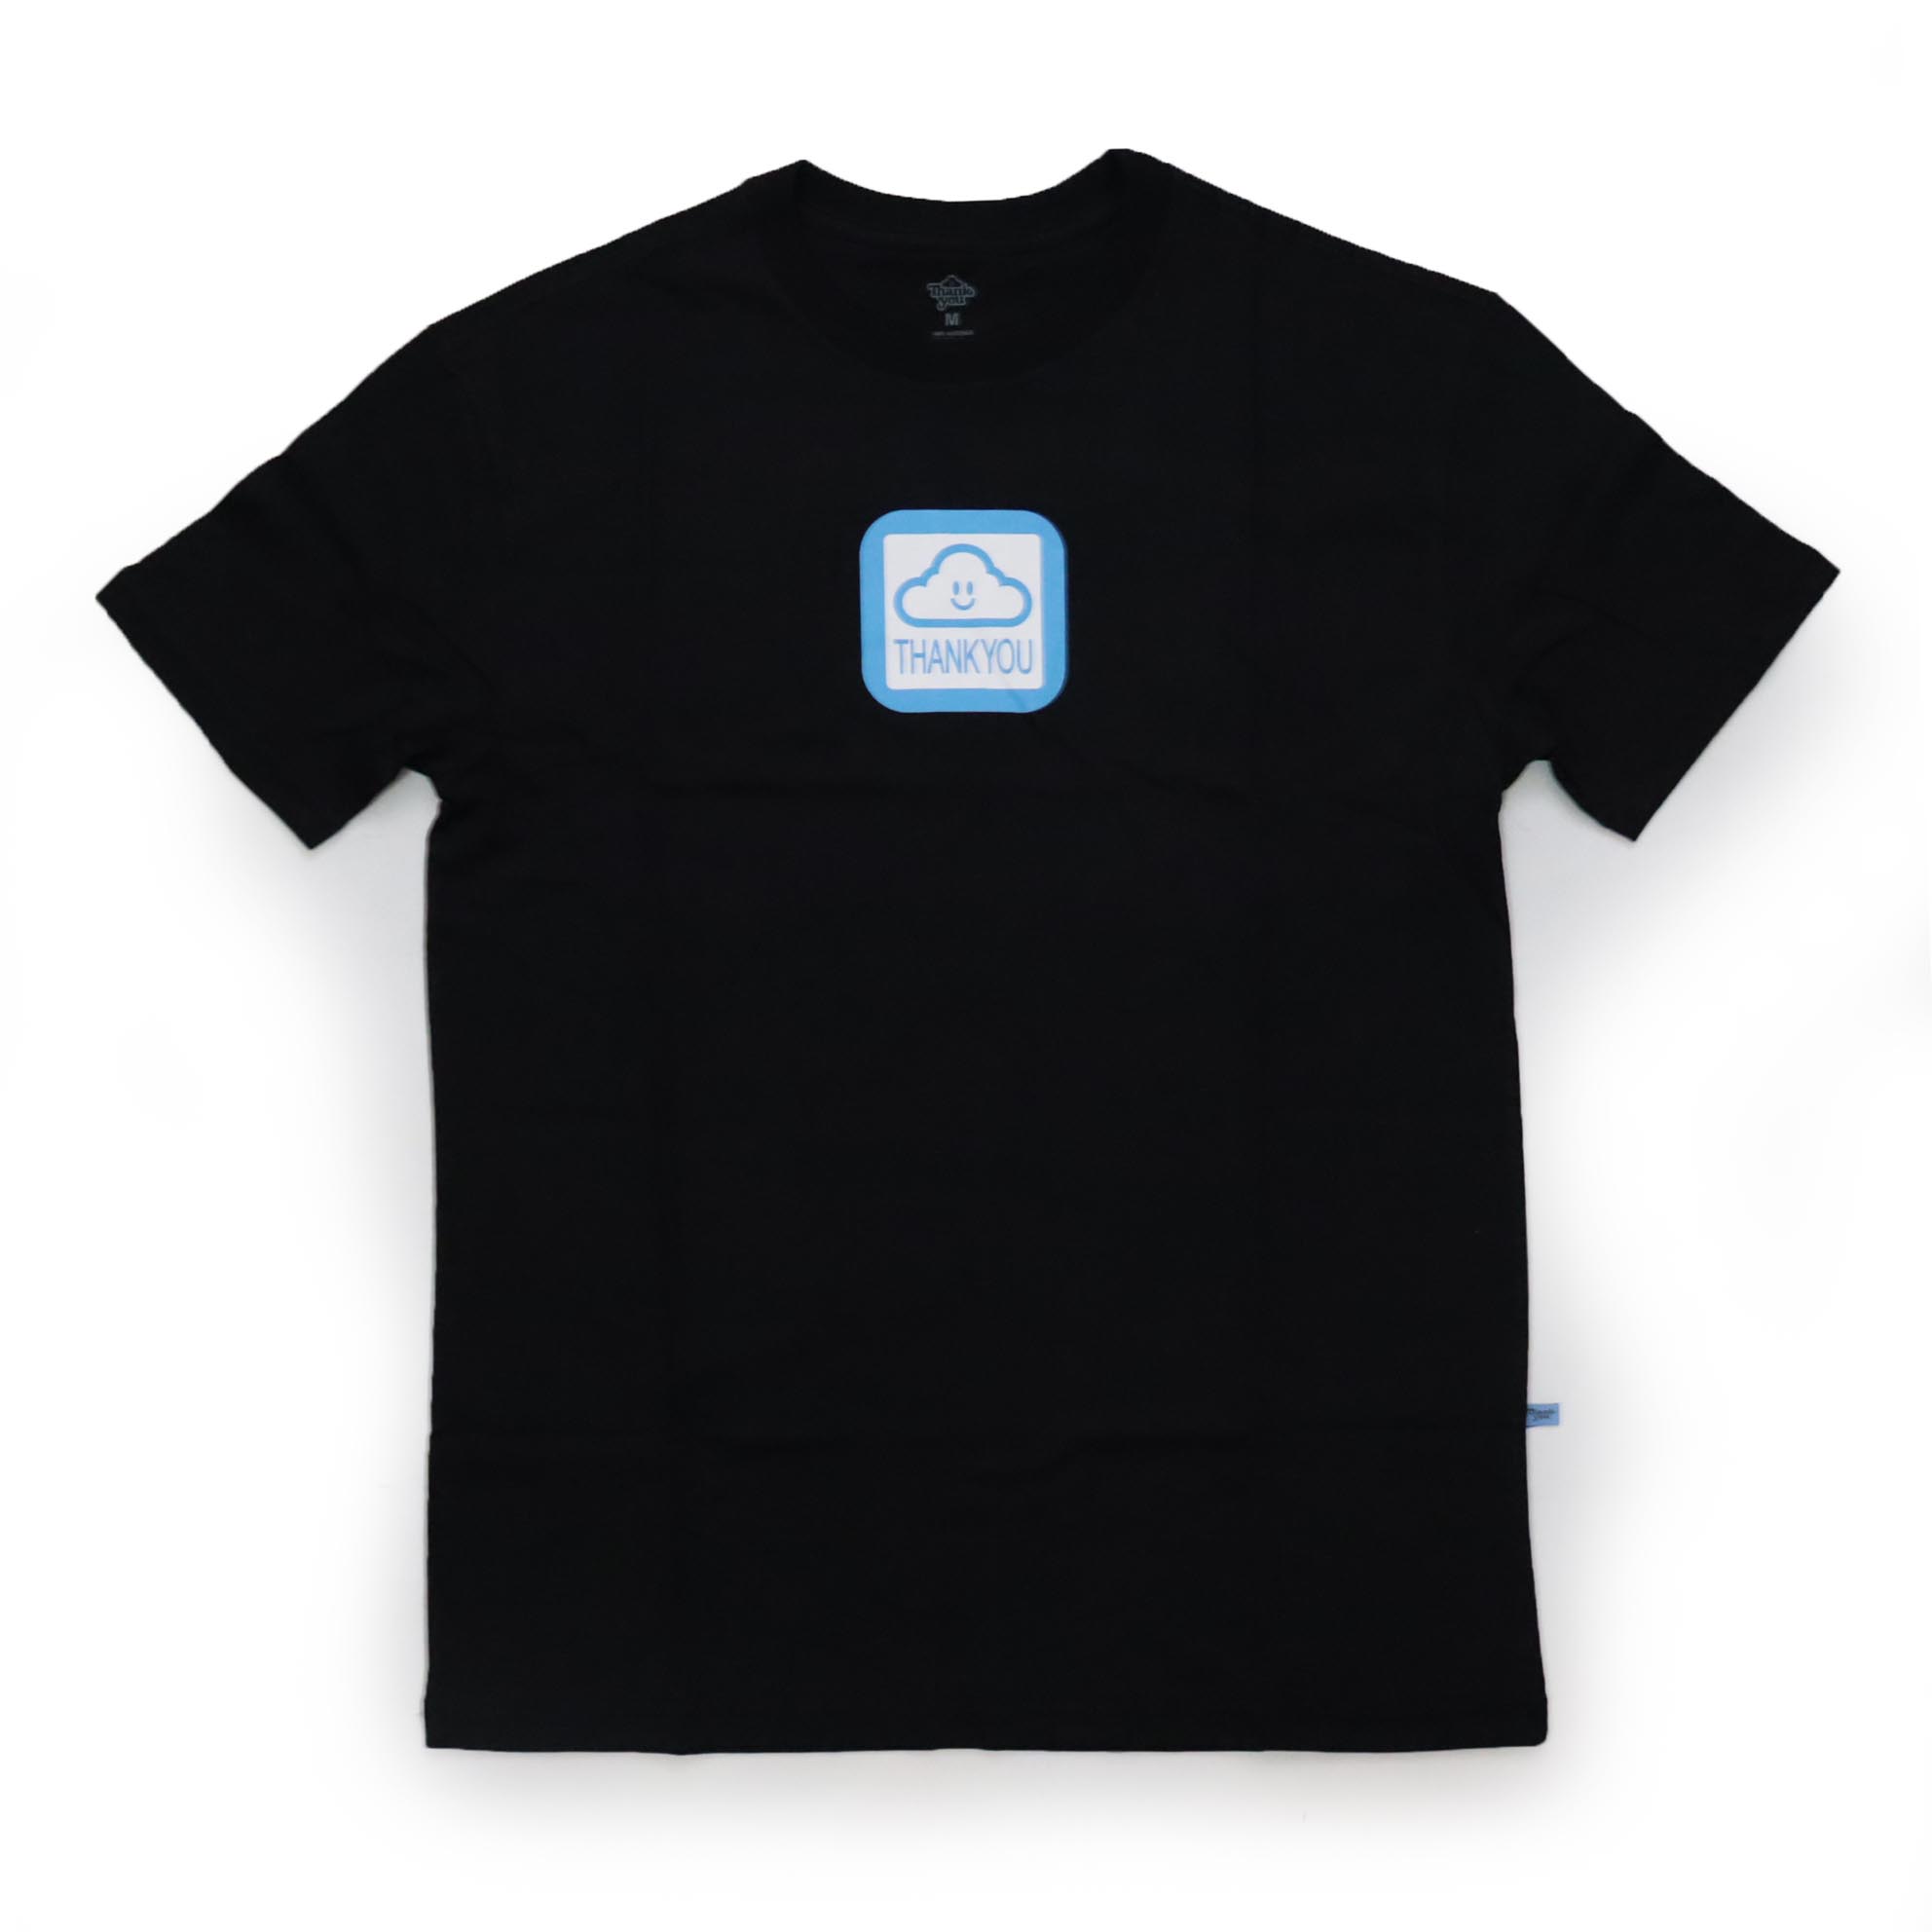 Camiseta Thank You Cloud Of The Fortune - Preto